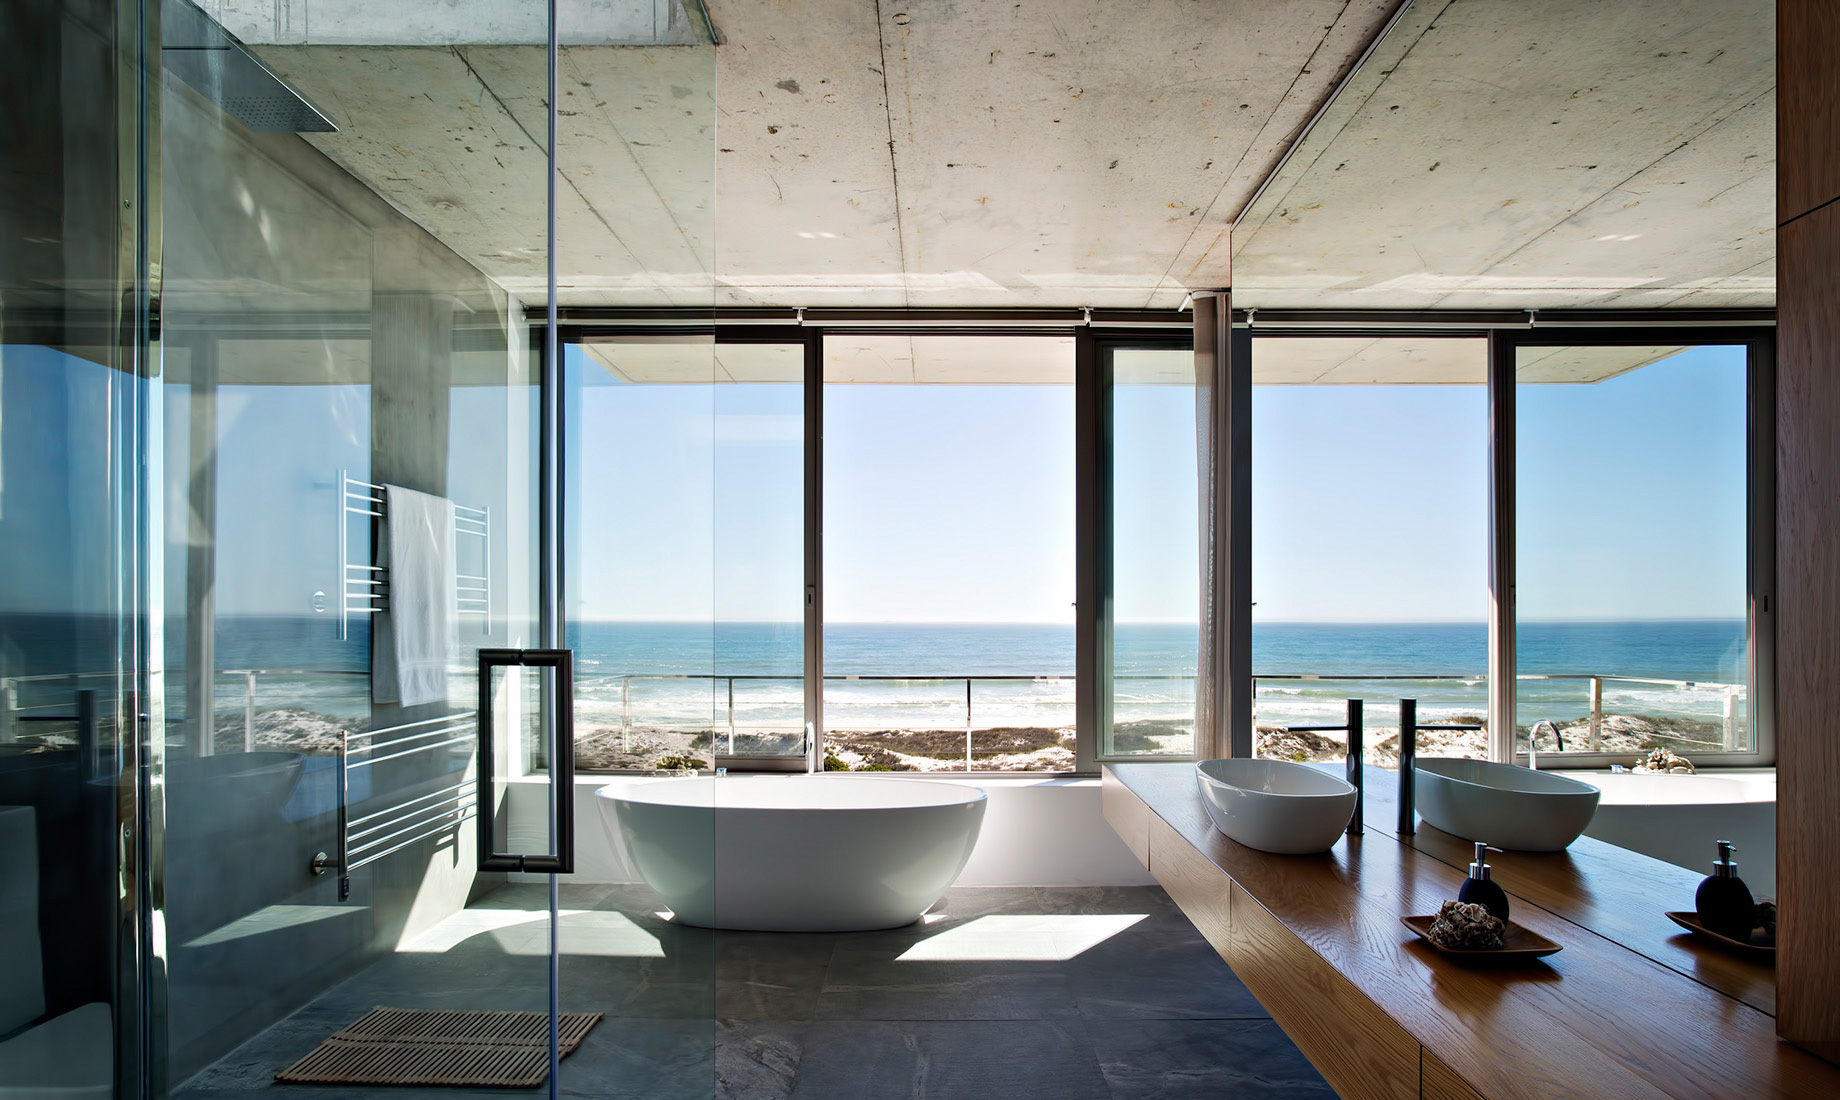 Pearl Bay Residence – Yzerfontein, Western Cape, South Africa